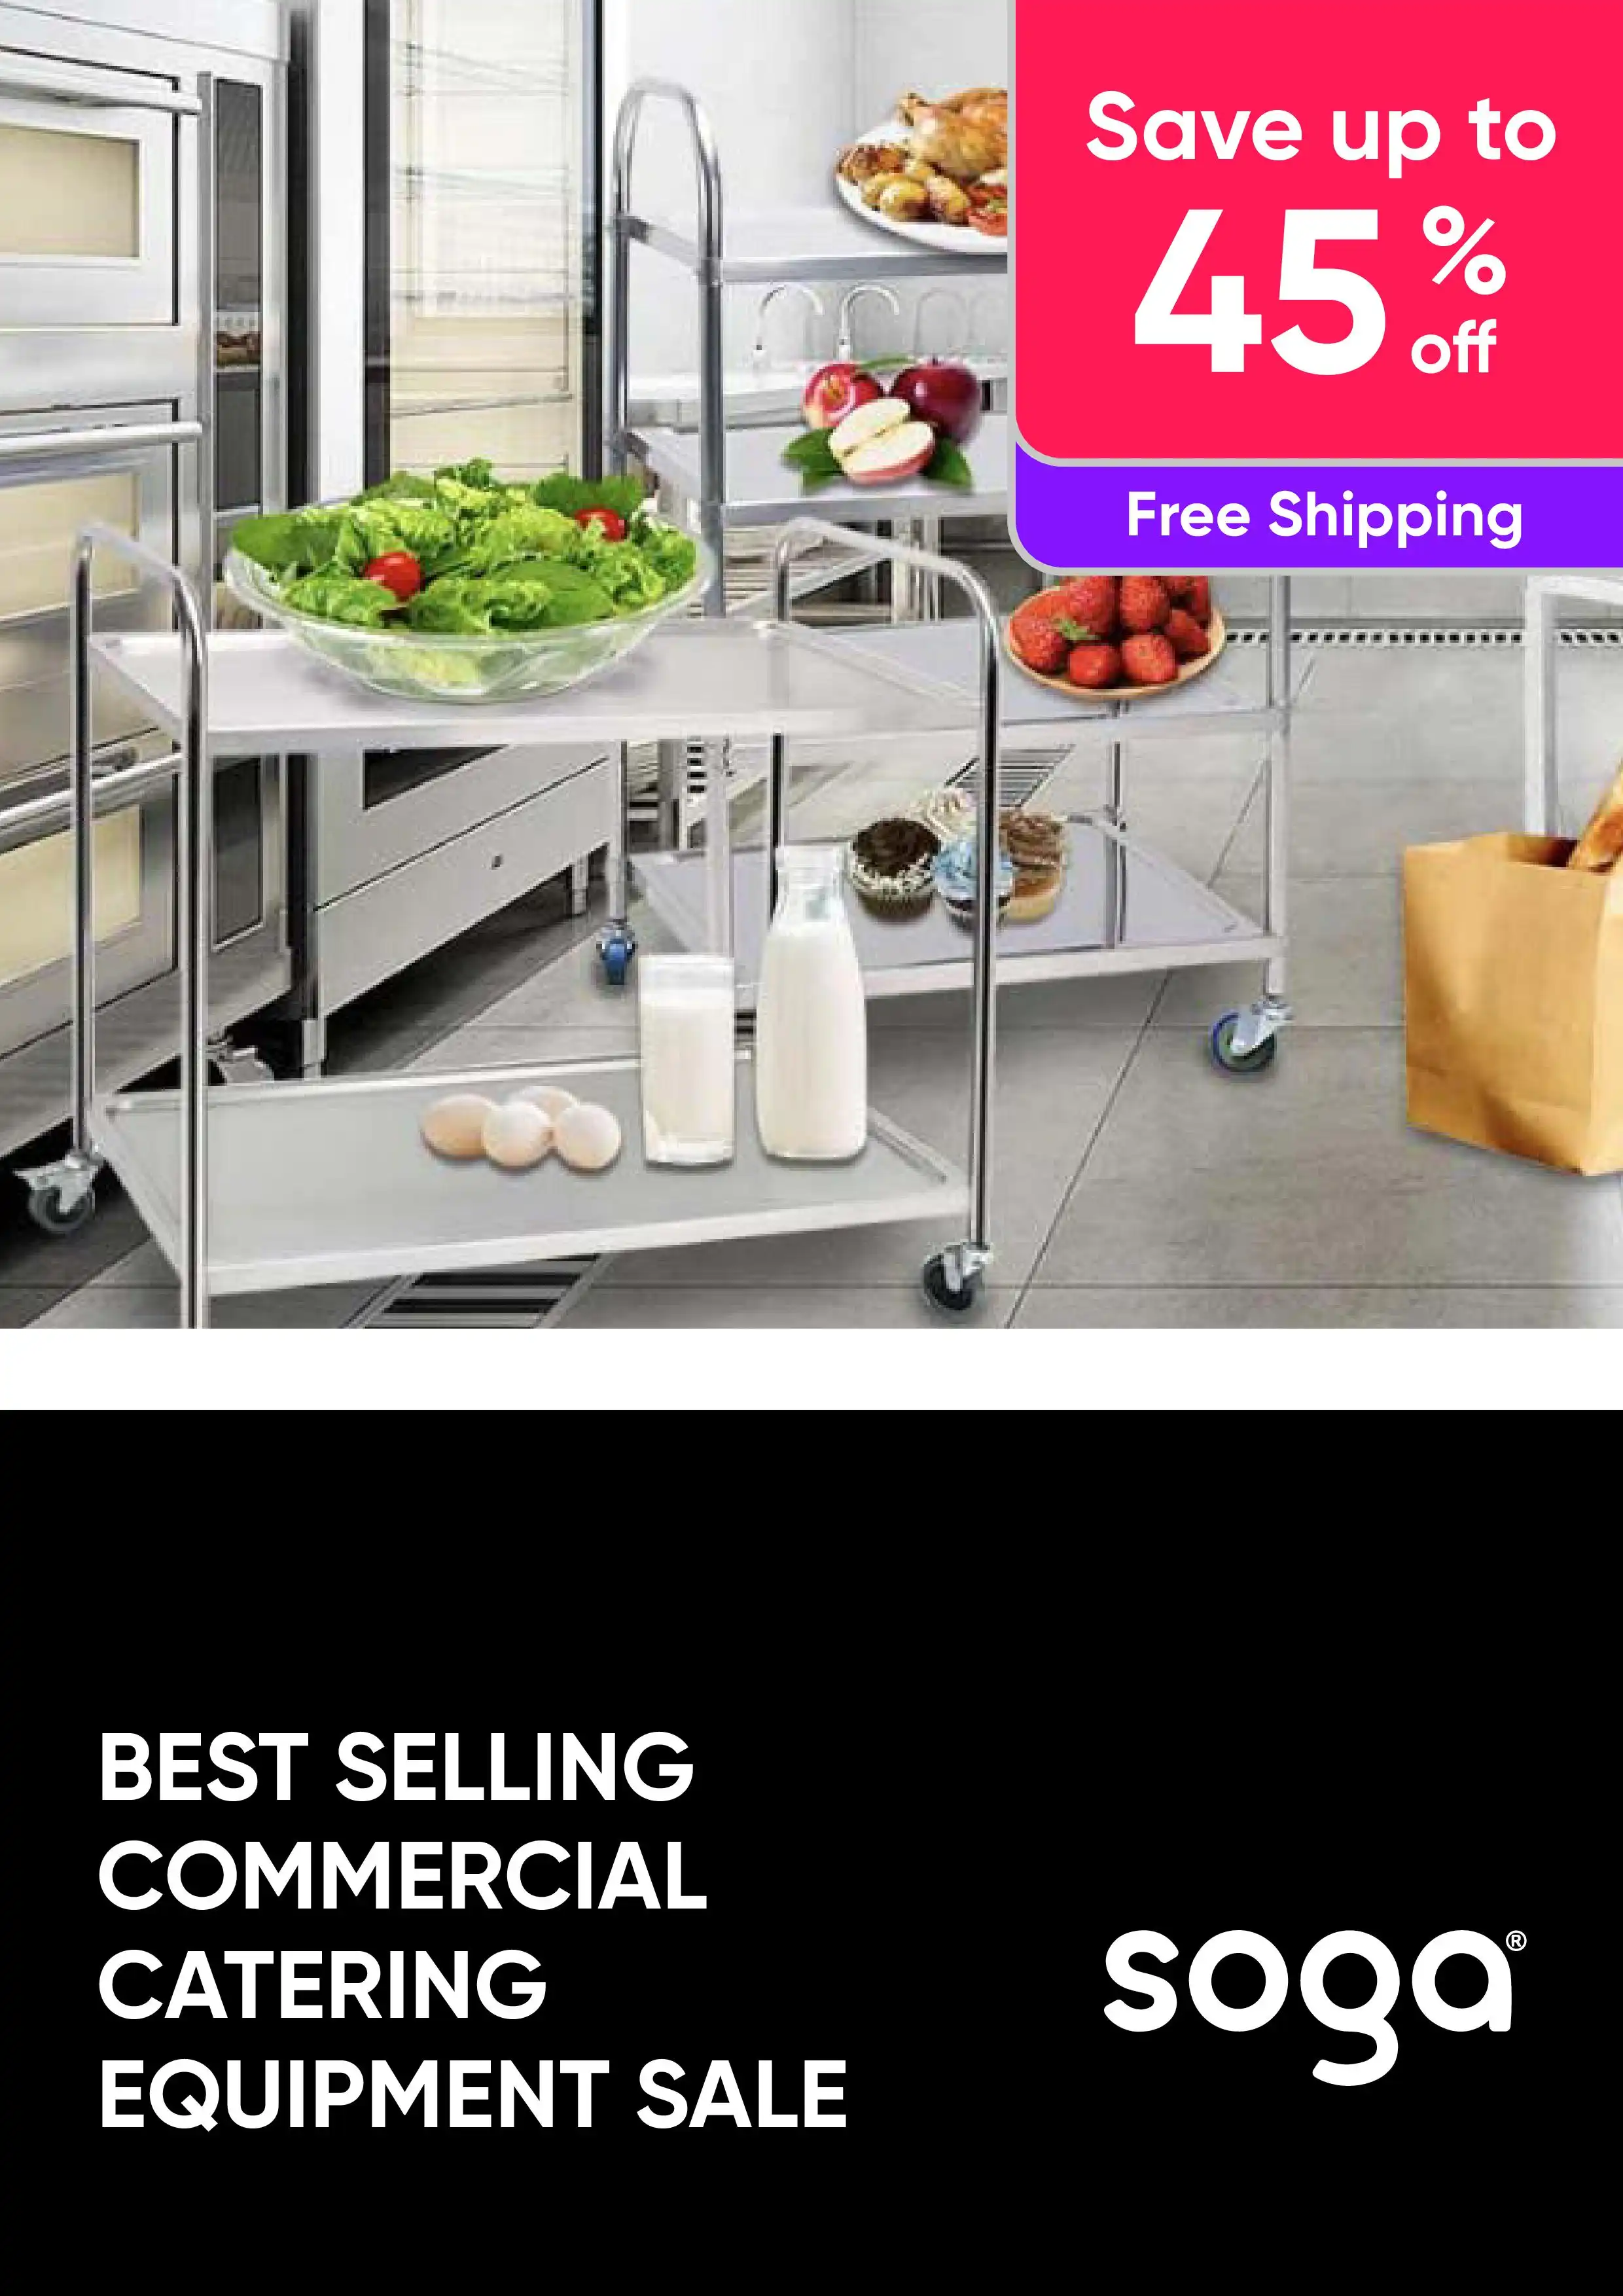 Best Selling Commercial Catering Equipment Sale - Up to 45% Off + Free Shipping